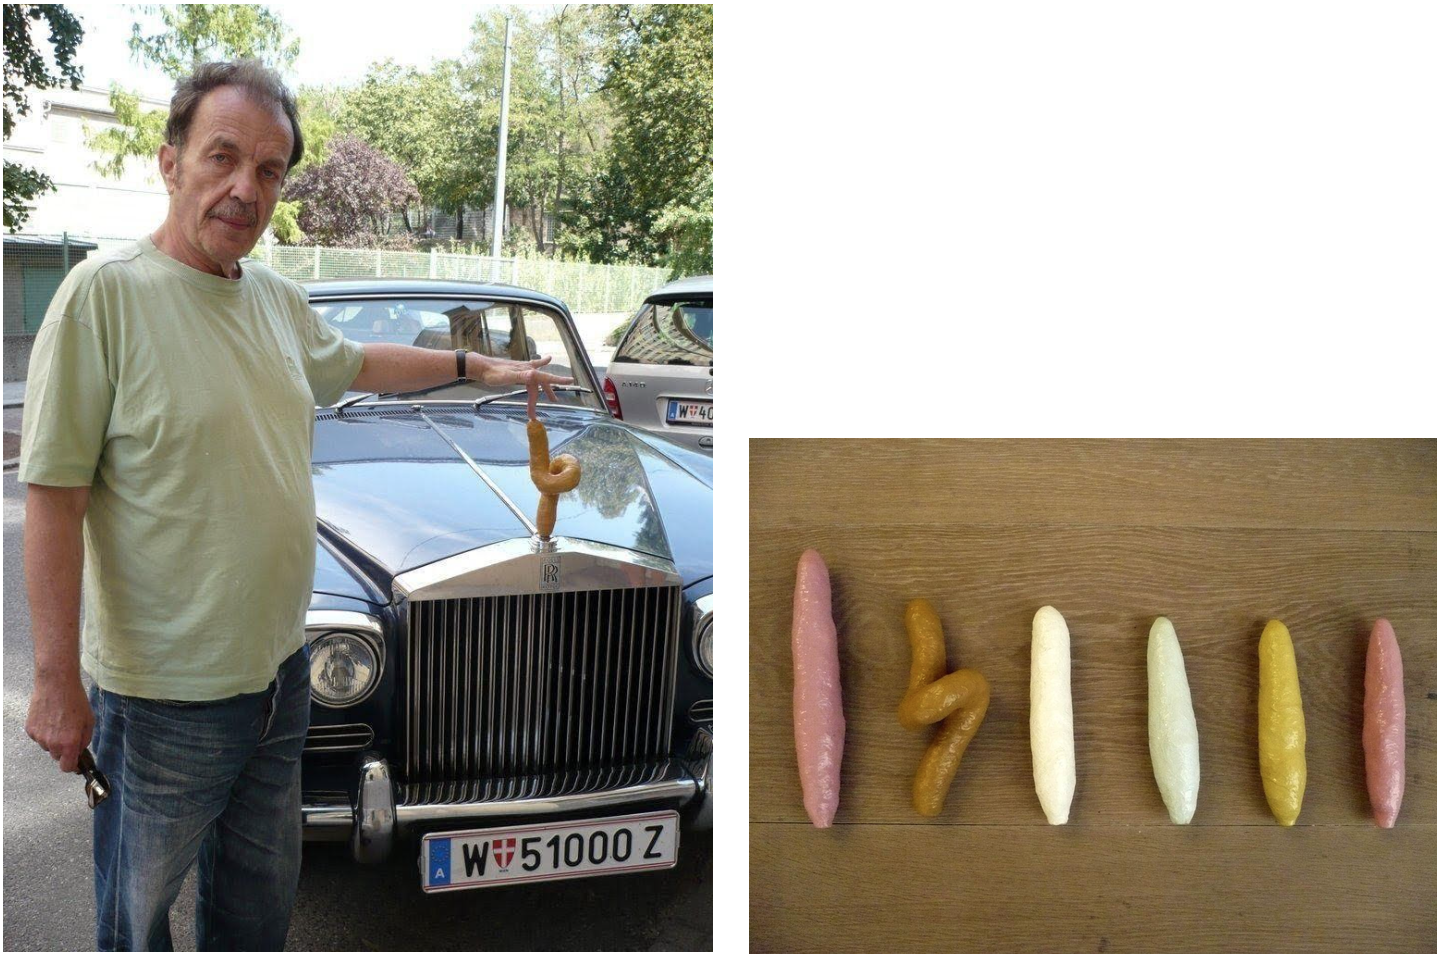 Left:&nbsp;

Franz West&nbsp;with&nbsp;Adaptive for Rolls Royce Silver Shadow, 2007
Photo: Franz West Privatstiftung
&nbsp;&copy;&nbsp;Archiv Franz West;&nbsp;&copy; Estate Franz West

The collection of Erling Kagge
Courtesy:&nbsp;Archiv Franz West and Estate Franz West

&nbsp;

Right:

Franz West
6 Adaptives for Rolls Royce Silver Shadow, 2007
epoxy resin, metal
Rose: 31 x 5,5 x 5,5 cm
Rose: 23 x 5 x 5 cm
Yellow: 23 x 5 x 5 cm
White: 24,5 x 5 x 5 cm
Turquoise: 23 x 6 x 6 cm
Brown: 24 x 10 x 10 cm
&nbsp;&copy;&nbsp;Archiv Franz West,&nbsp;&copy; Estate of Franz West
Photo: Franz West Privatstiftung

The collection of Erling Kagge
Courtesy:&nbsp;Archiv Franz West and Estate of Franz West

&nbsp;